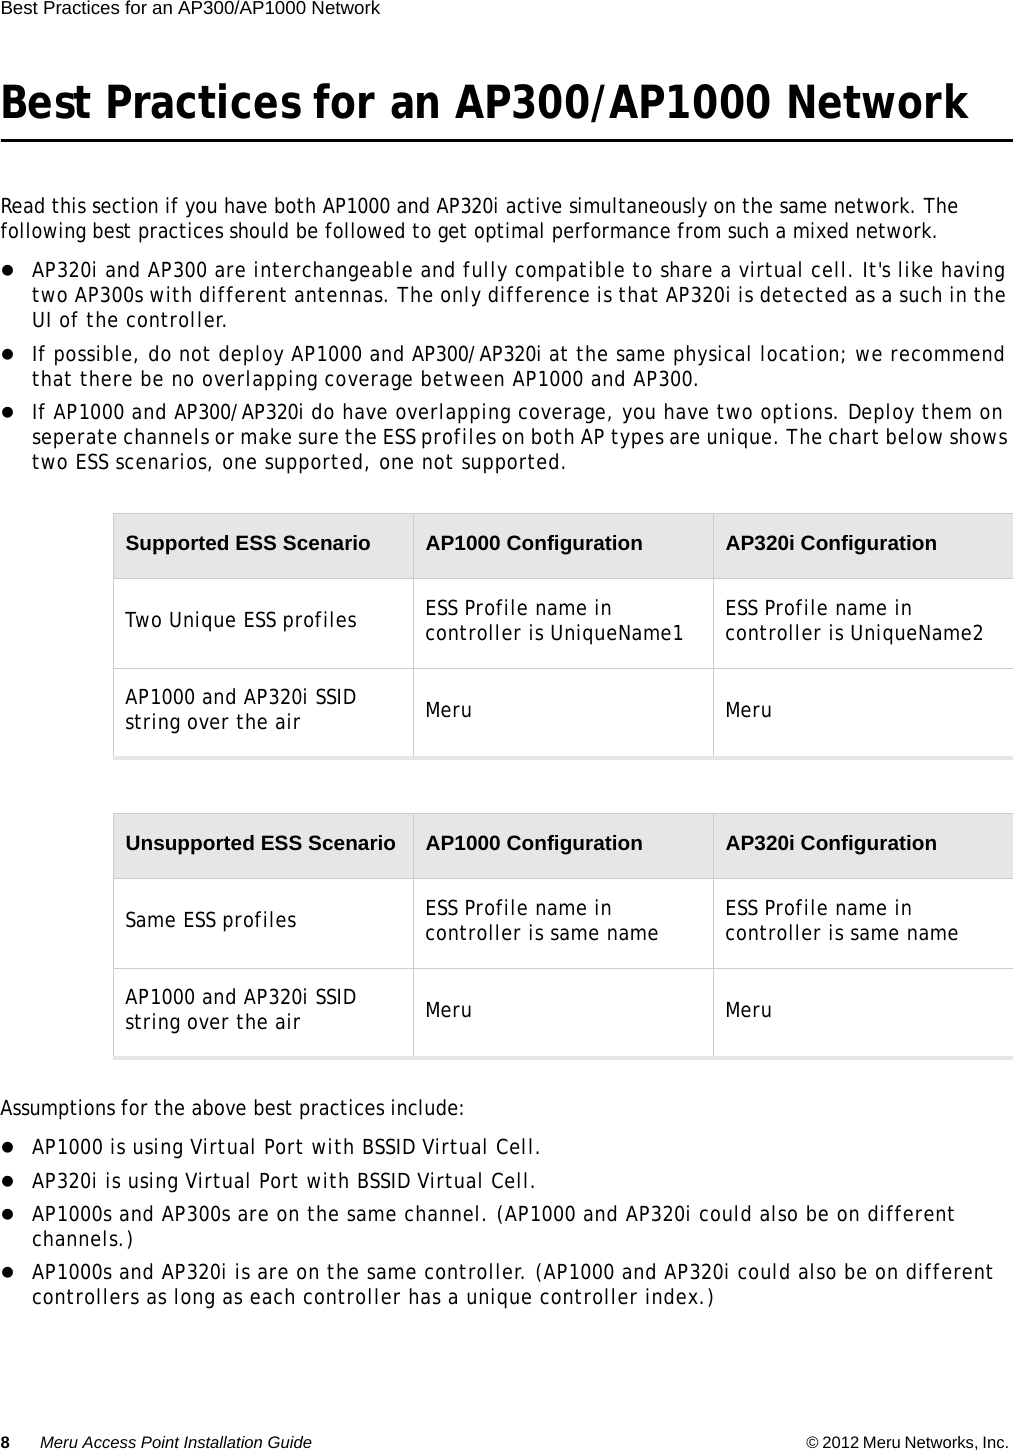 8Meru Access Point Installation Guide © 2012 Meru Networks, Inc. Best Practices for an AP300/AP1000 Network  Best Practices for an AP300/AP1000 Network Read this section if you have both AP1000 and AP320i active simultaneously on the same network. The following best practices should be followed to get optimal performance from such a mixed network. AP320i and AP300 are interchangeable and fully compatible to share a virtual cell. It&apos;s like having two AP300s with different antennas. The only difference is that AP320i is detected as a such in the UI of the controller.If possible, do not deploy AP1000 and AP300/AP320i at the same physical location; we recommend that there be no overlapping coverage between AP1000 and AP300.If AP1000 and AP300/AP320i do have overlapping coverage, you have two options. Deploy them on seperate channels or make sure the ESS profiles on both AP types are unique. The chart below shows two ESS scenarios, one supported, one not supported. Assumptions for the above best practices include:AP1000 is using Virtual Port with BSSID Virtual Cell. AP320i is using Virtual Port with BSSID Virtual Cell.AP1000s and AP300s are on the same channel. (AP1000 and AP320i could also be on different channels.) AP1000s and AP320i is are on the same controller. (AP1000 and AP320i could also be on different controllers as long as each controller has a unique controller index.) Supported ESS Scenario AP1000 Configuration AP320i ConfigurationTwo Unique ESS profiles ESS Profile name in controller is UniqueName1 ESS Profile name in controller is UniqueName2AP1000 and AP320i SSID string over the air  Meru MeruUnsupported ESS Scenario AP1000 Configuration AP320i ConfigurationSame ESS profiles ESS Profile name in controller is same name ESS Profile name in controller is same nameAP1000 and AP320i SSID string over the air  Meru Meru